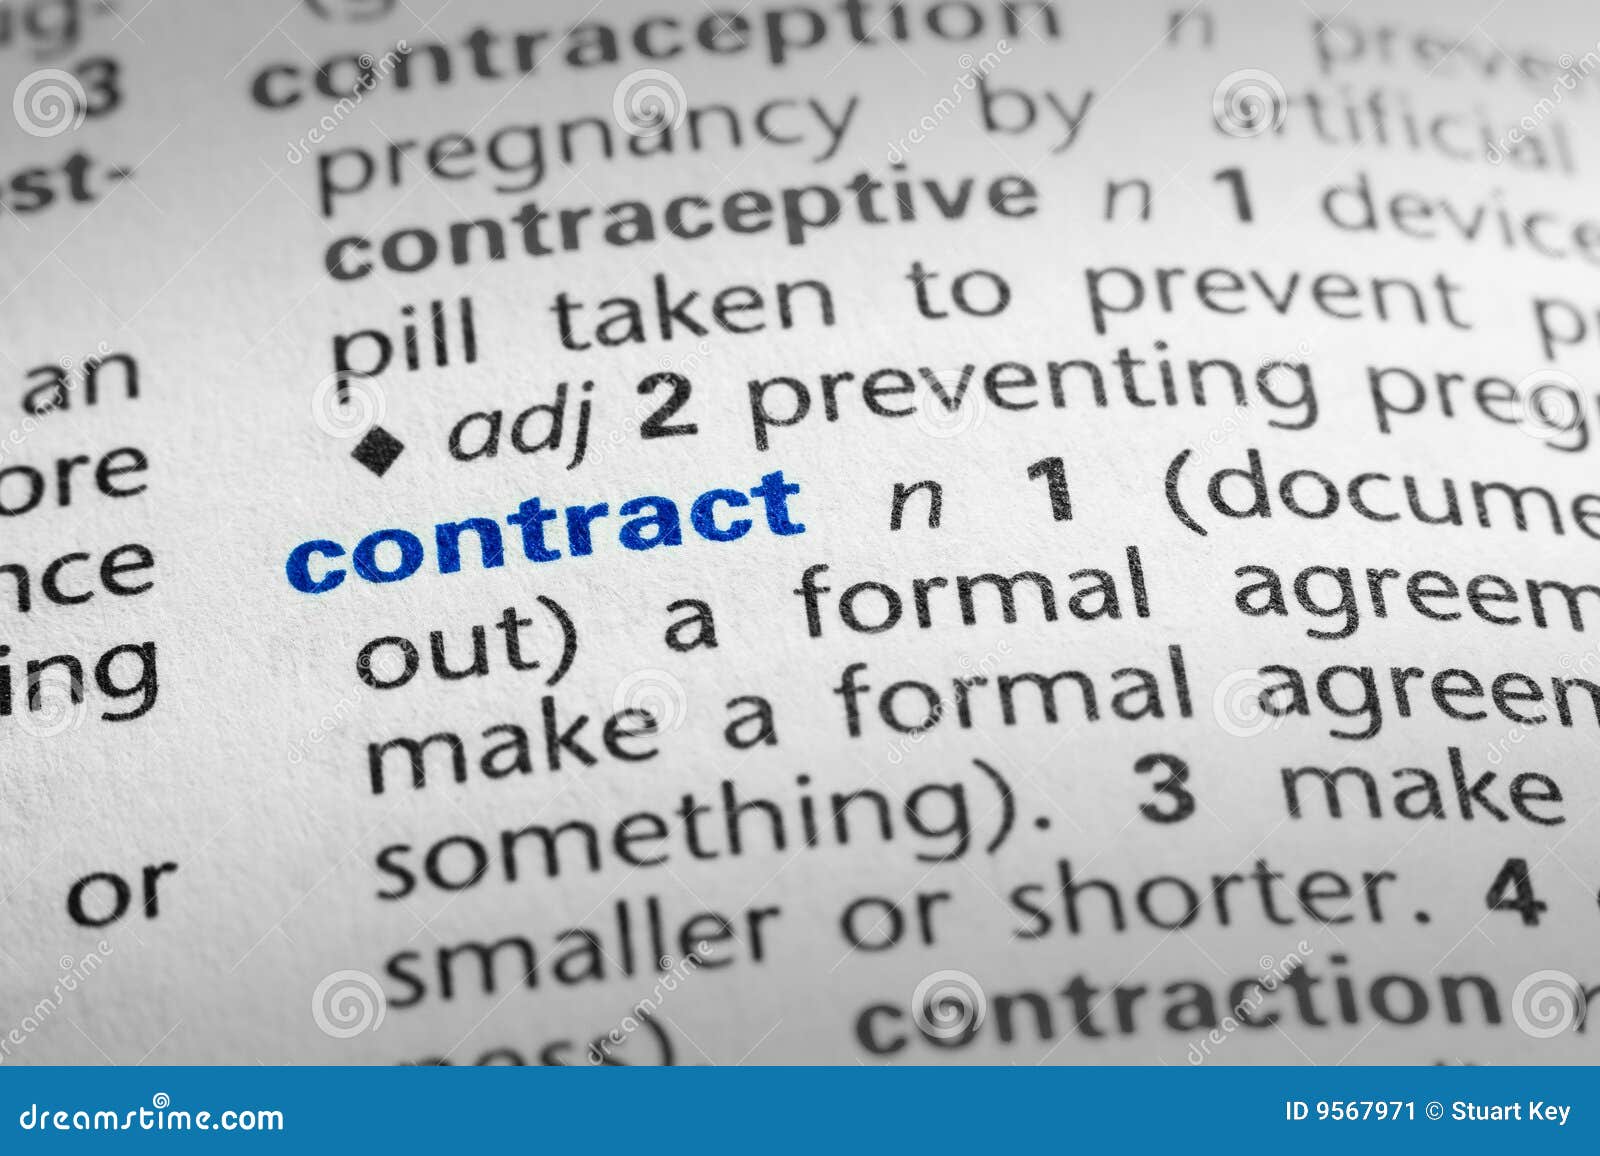 definition of contract